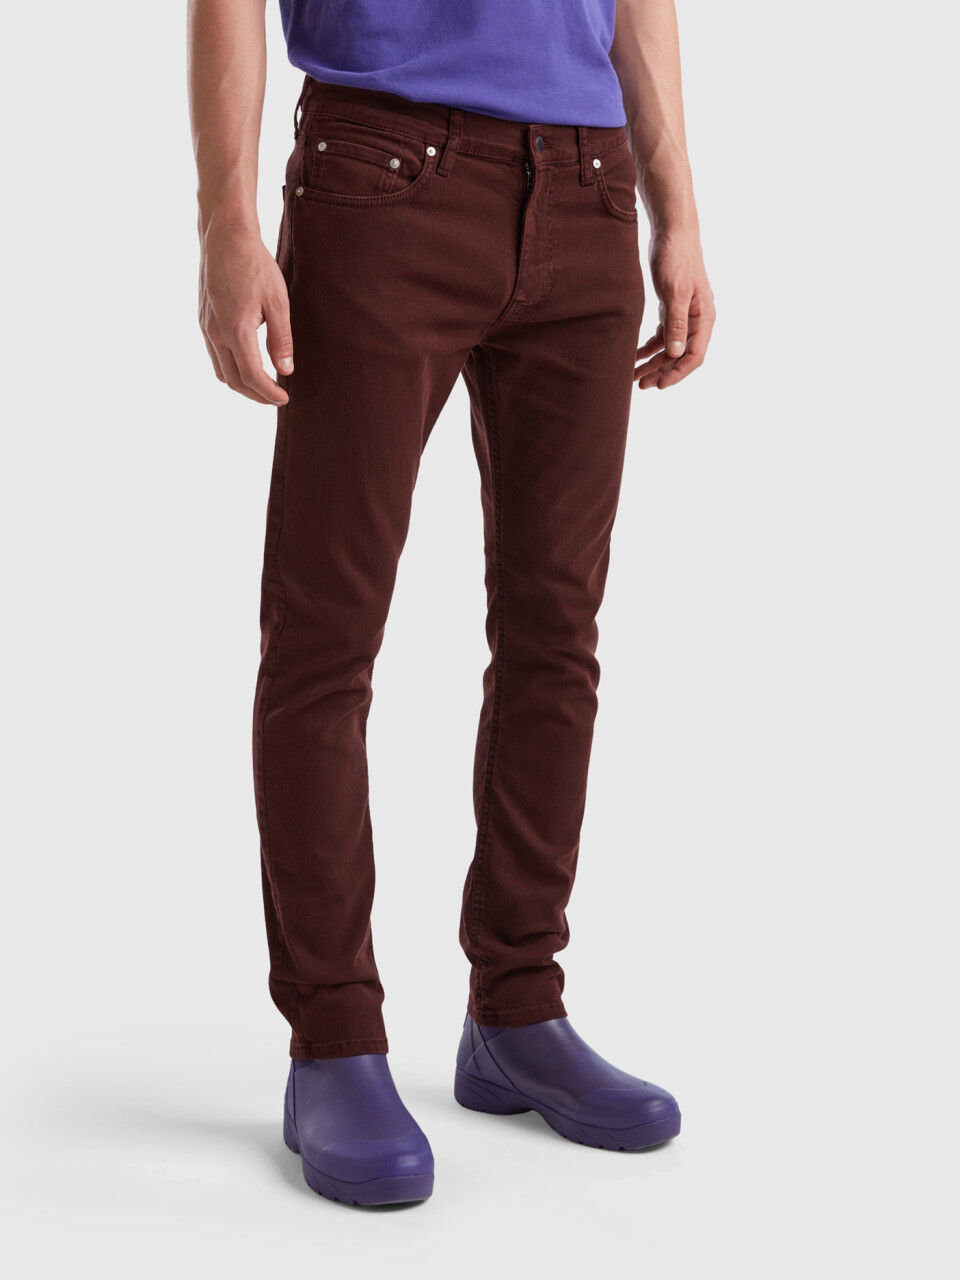 Burgundy chinos - Business trousers